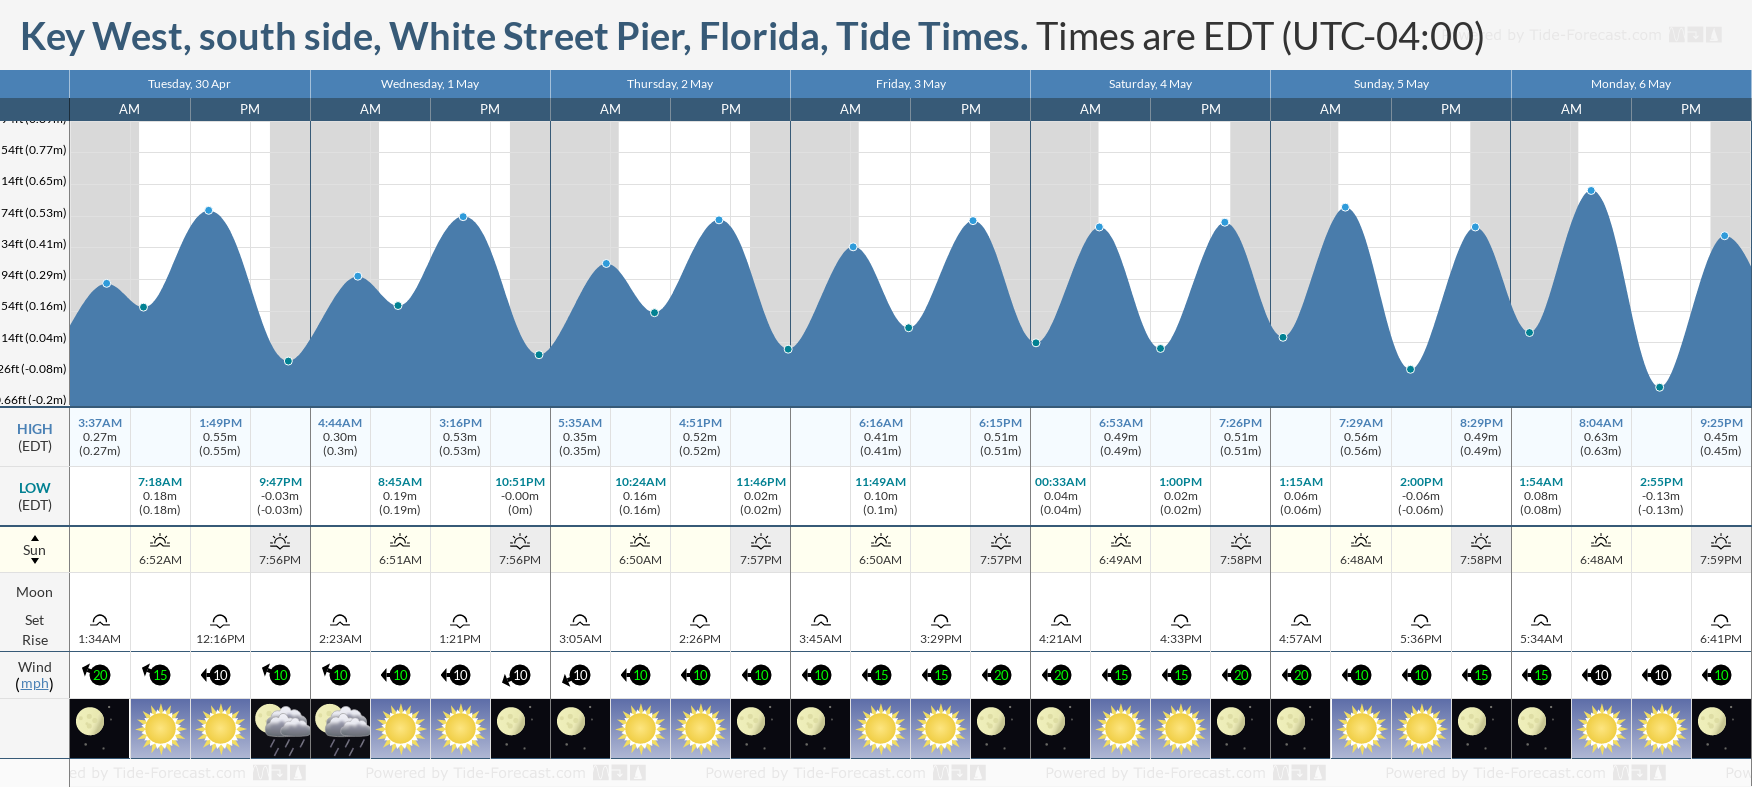 Key West, south side, White Street Pier, Florida Tide Chart including high and low tide times for the next 7 days